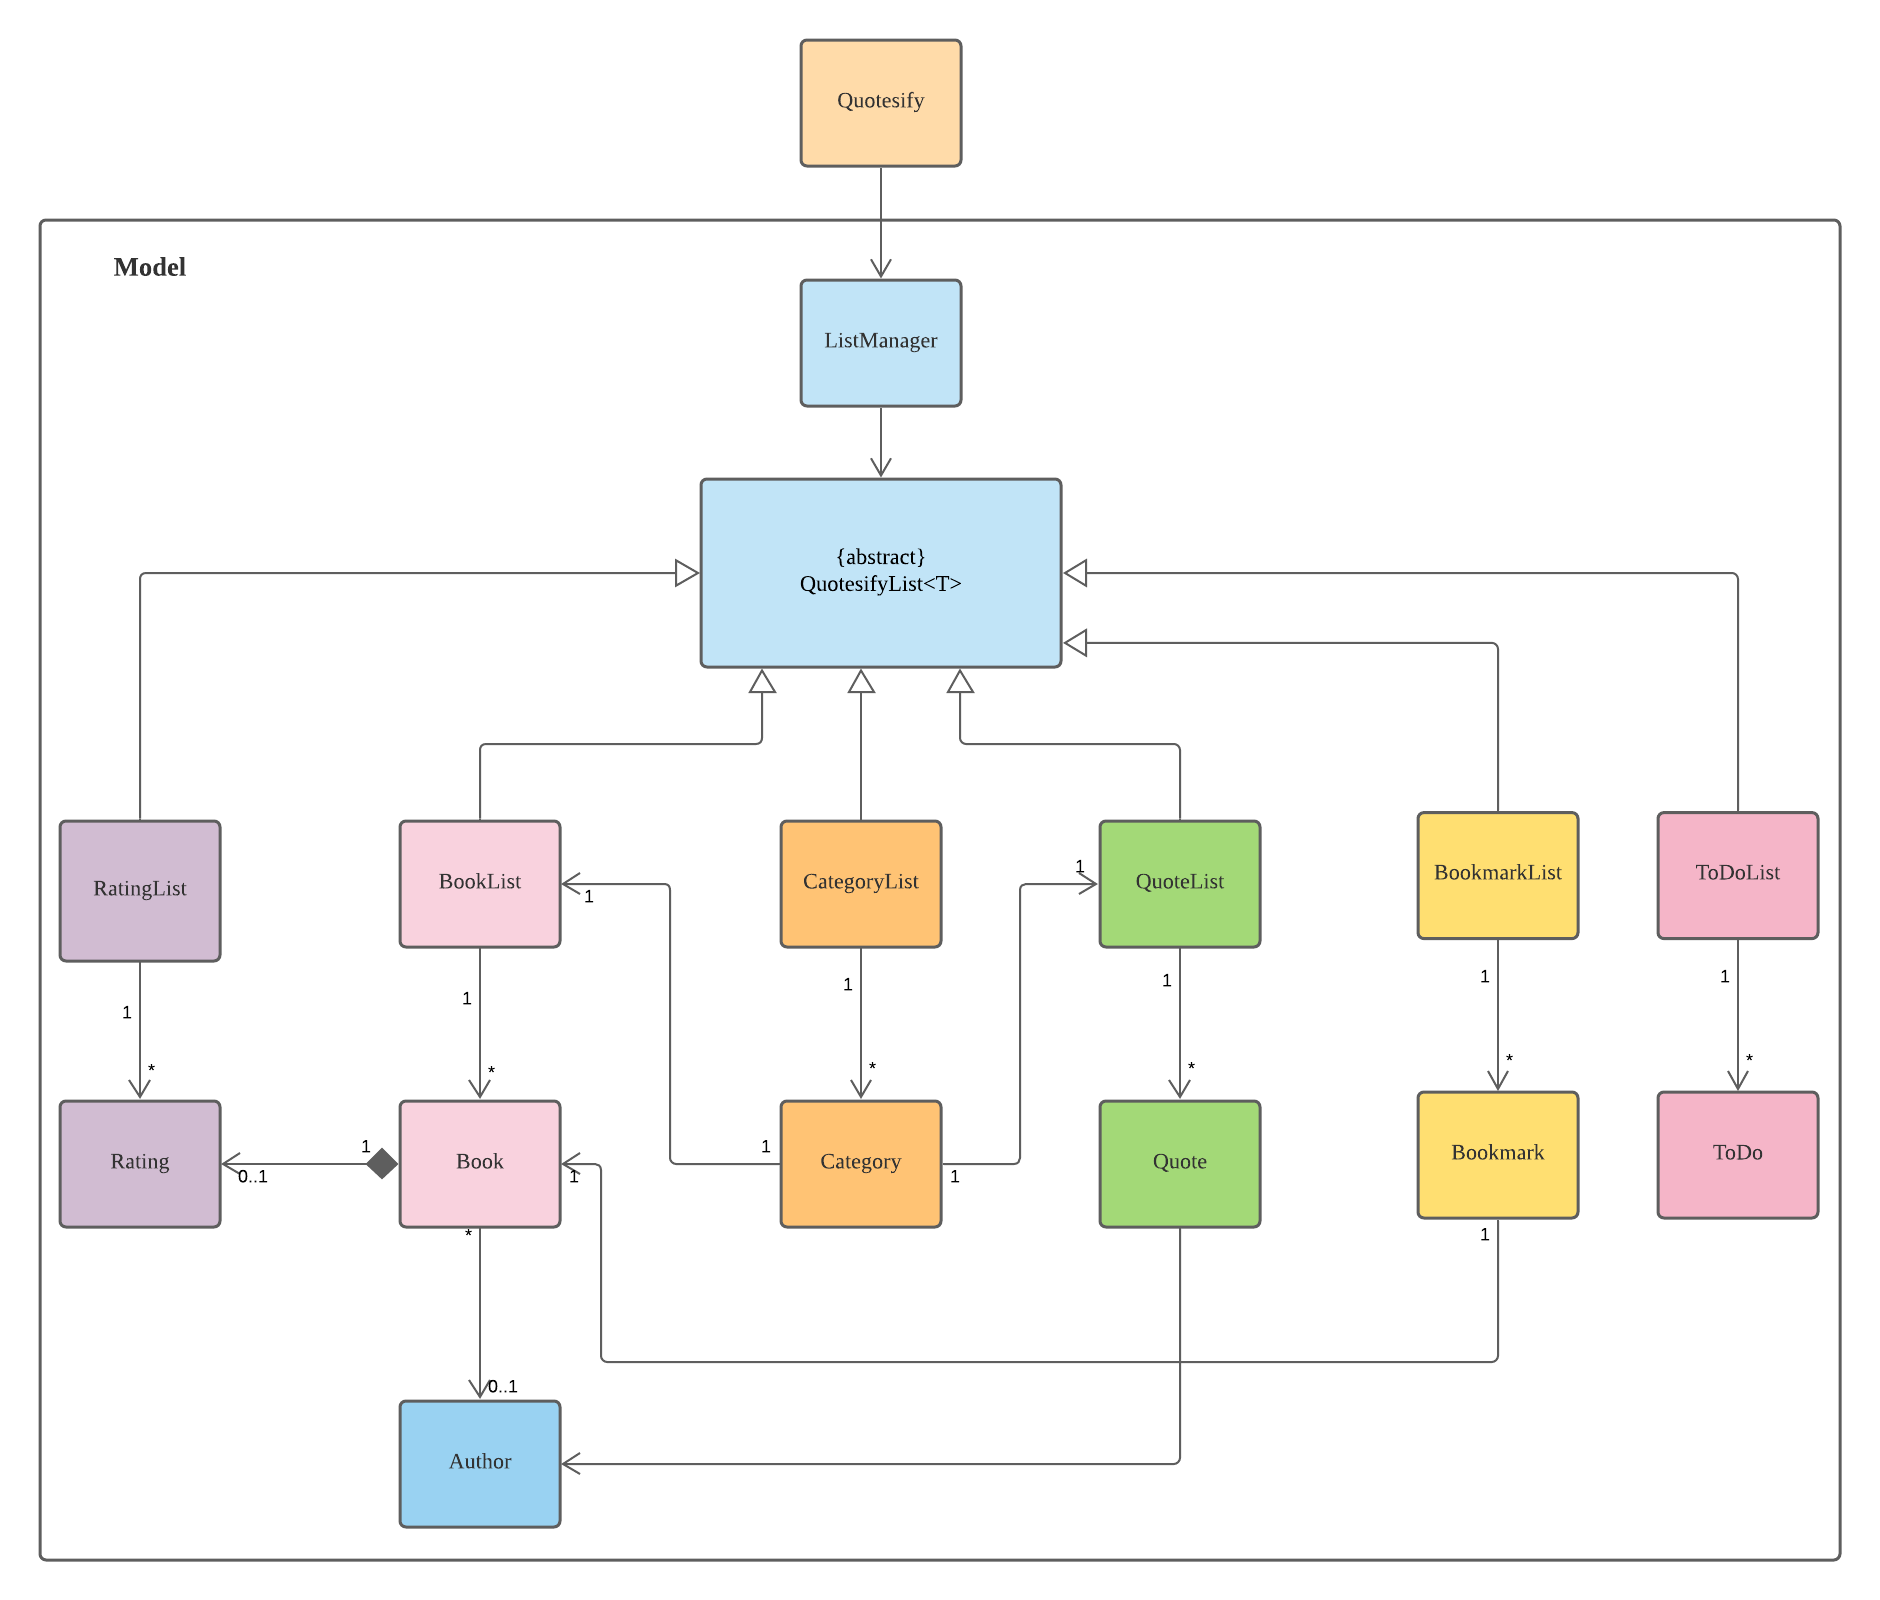 Class Diagram for Model Component